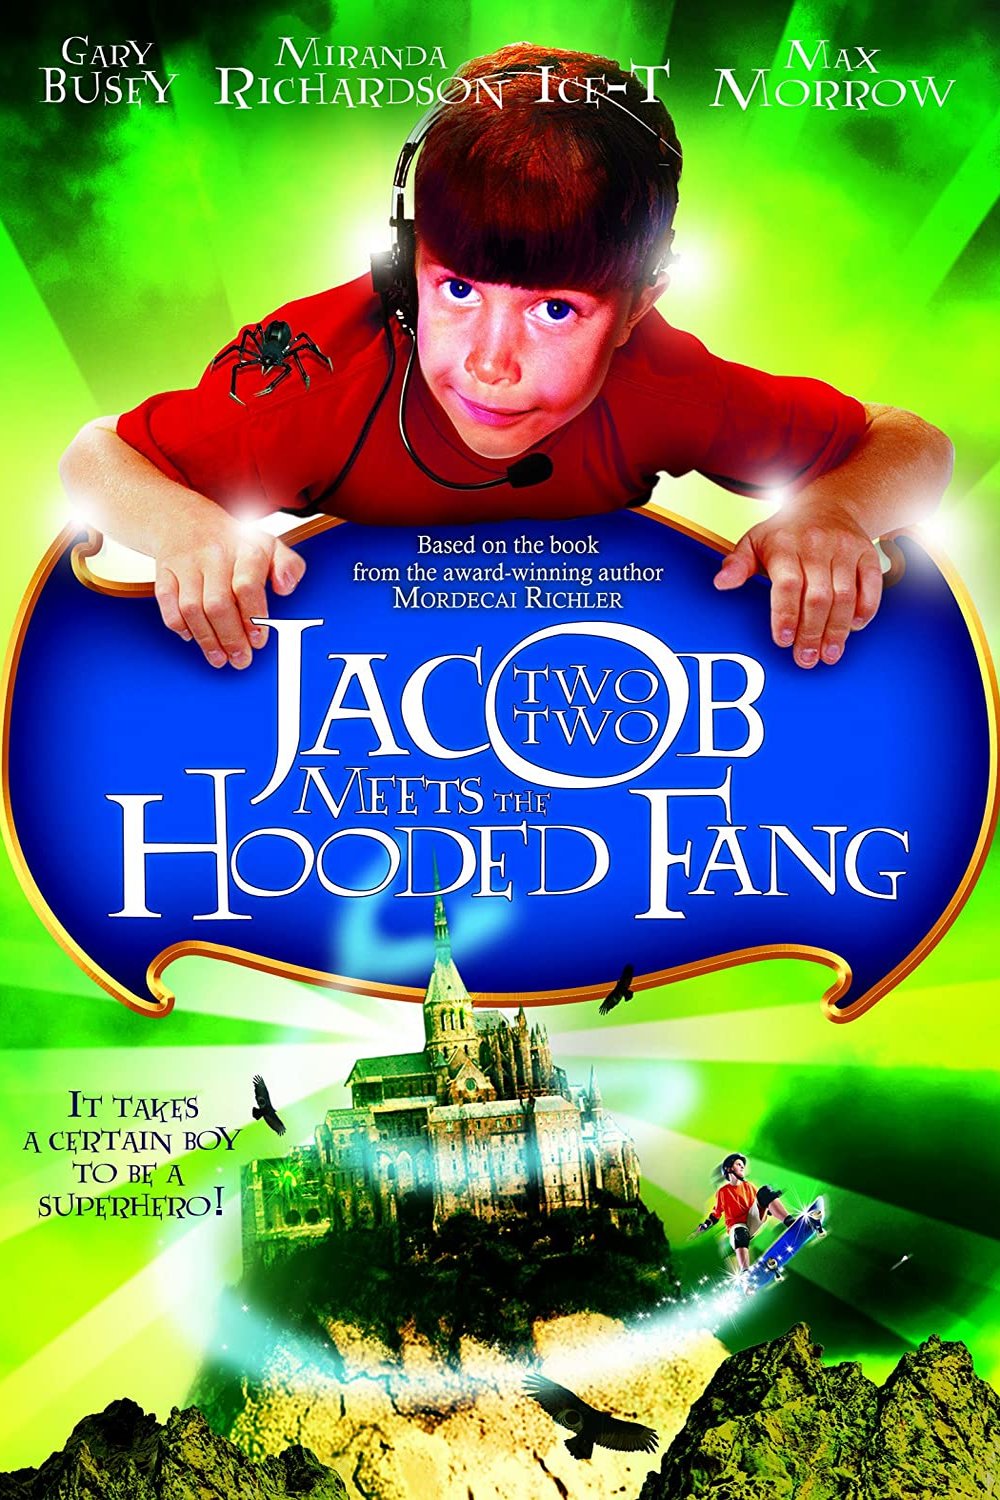 L'affiche du film Jacob Two Two Meets the Hooded Fang